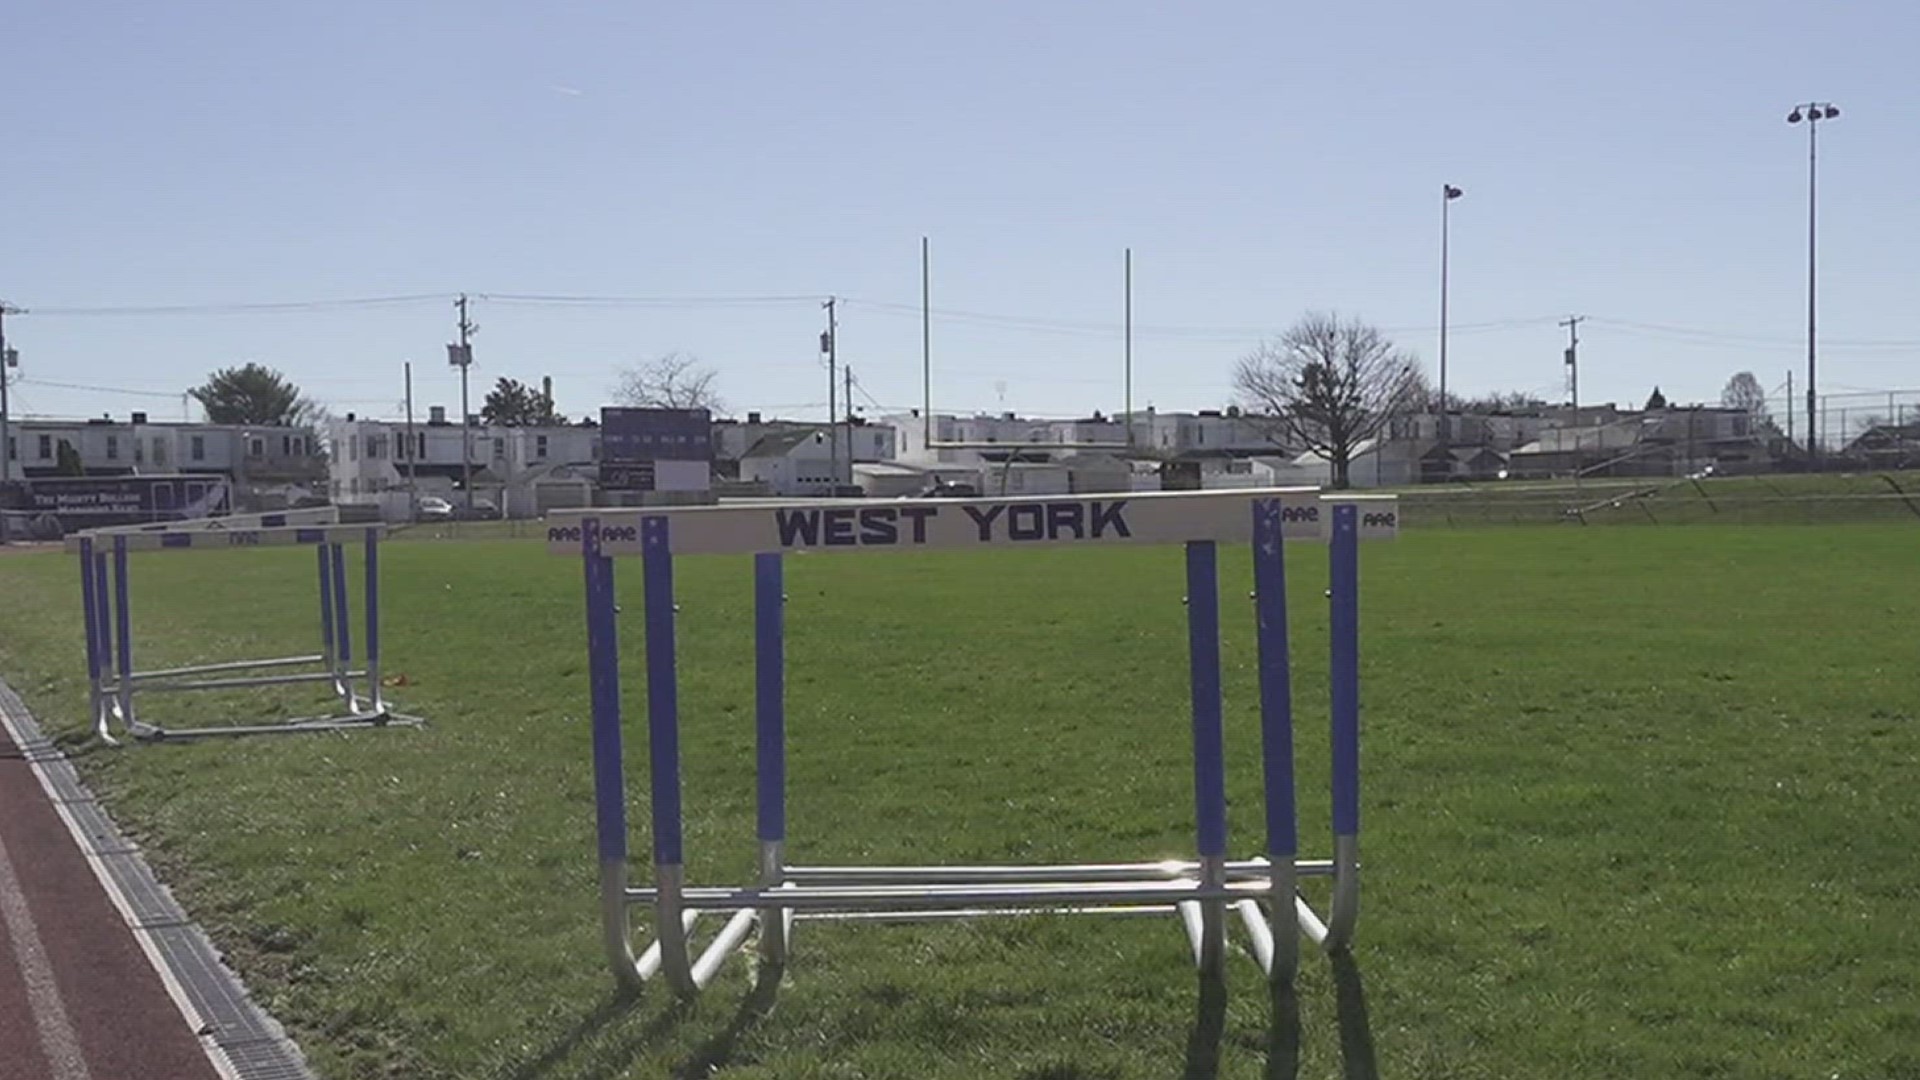 The West York Area School District voted unanimously to move forward with the $20 million athletic field renovations project in last night's board meeting.